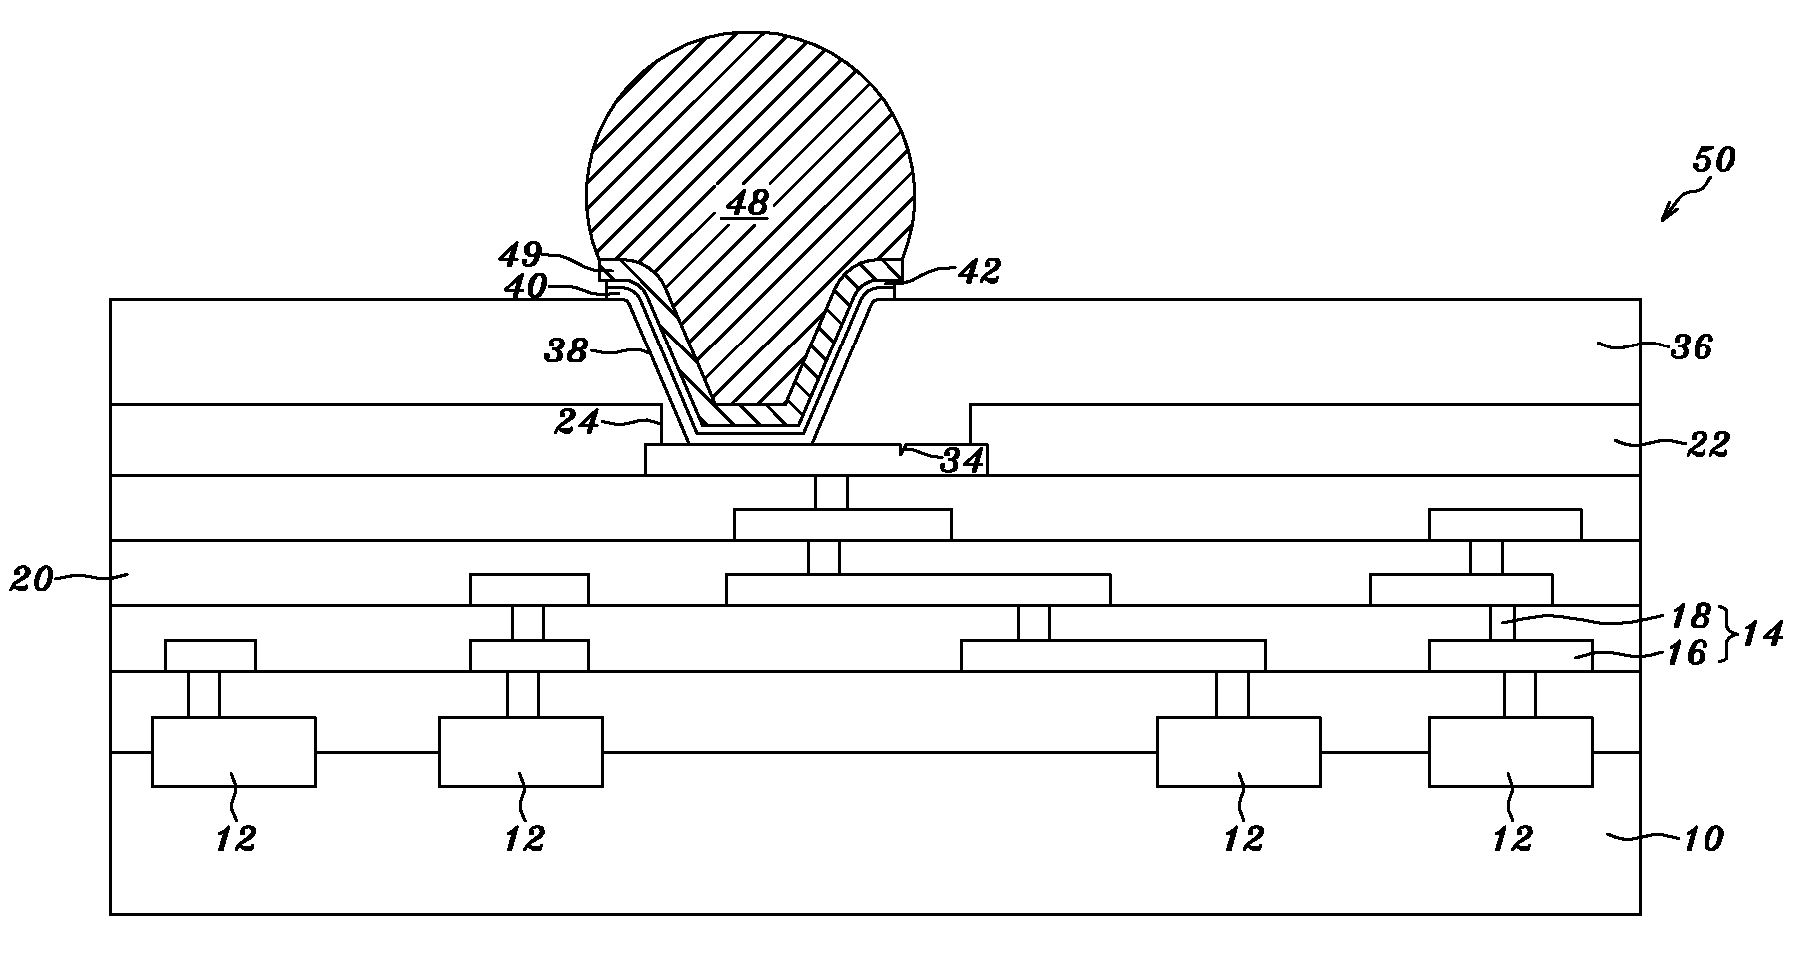 Semiconductor chip with bond area